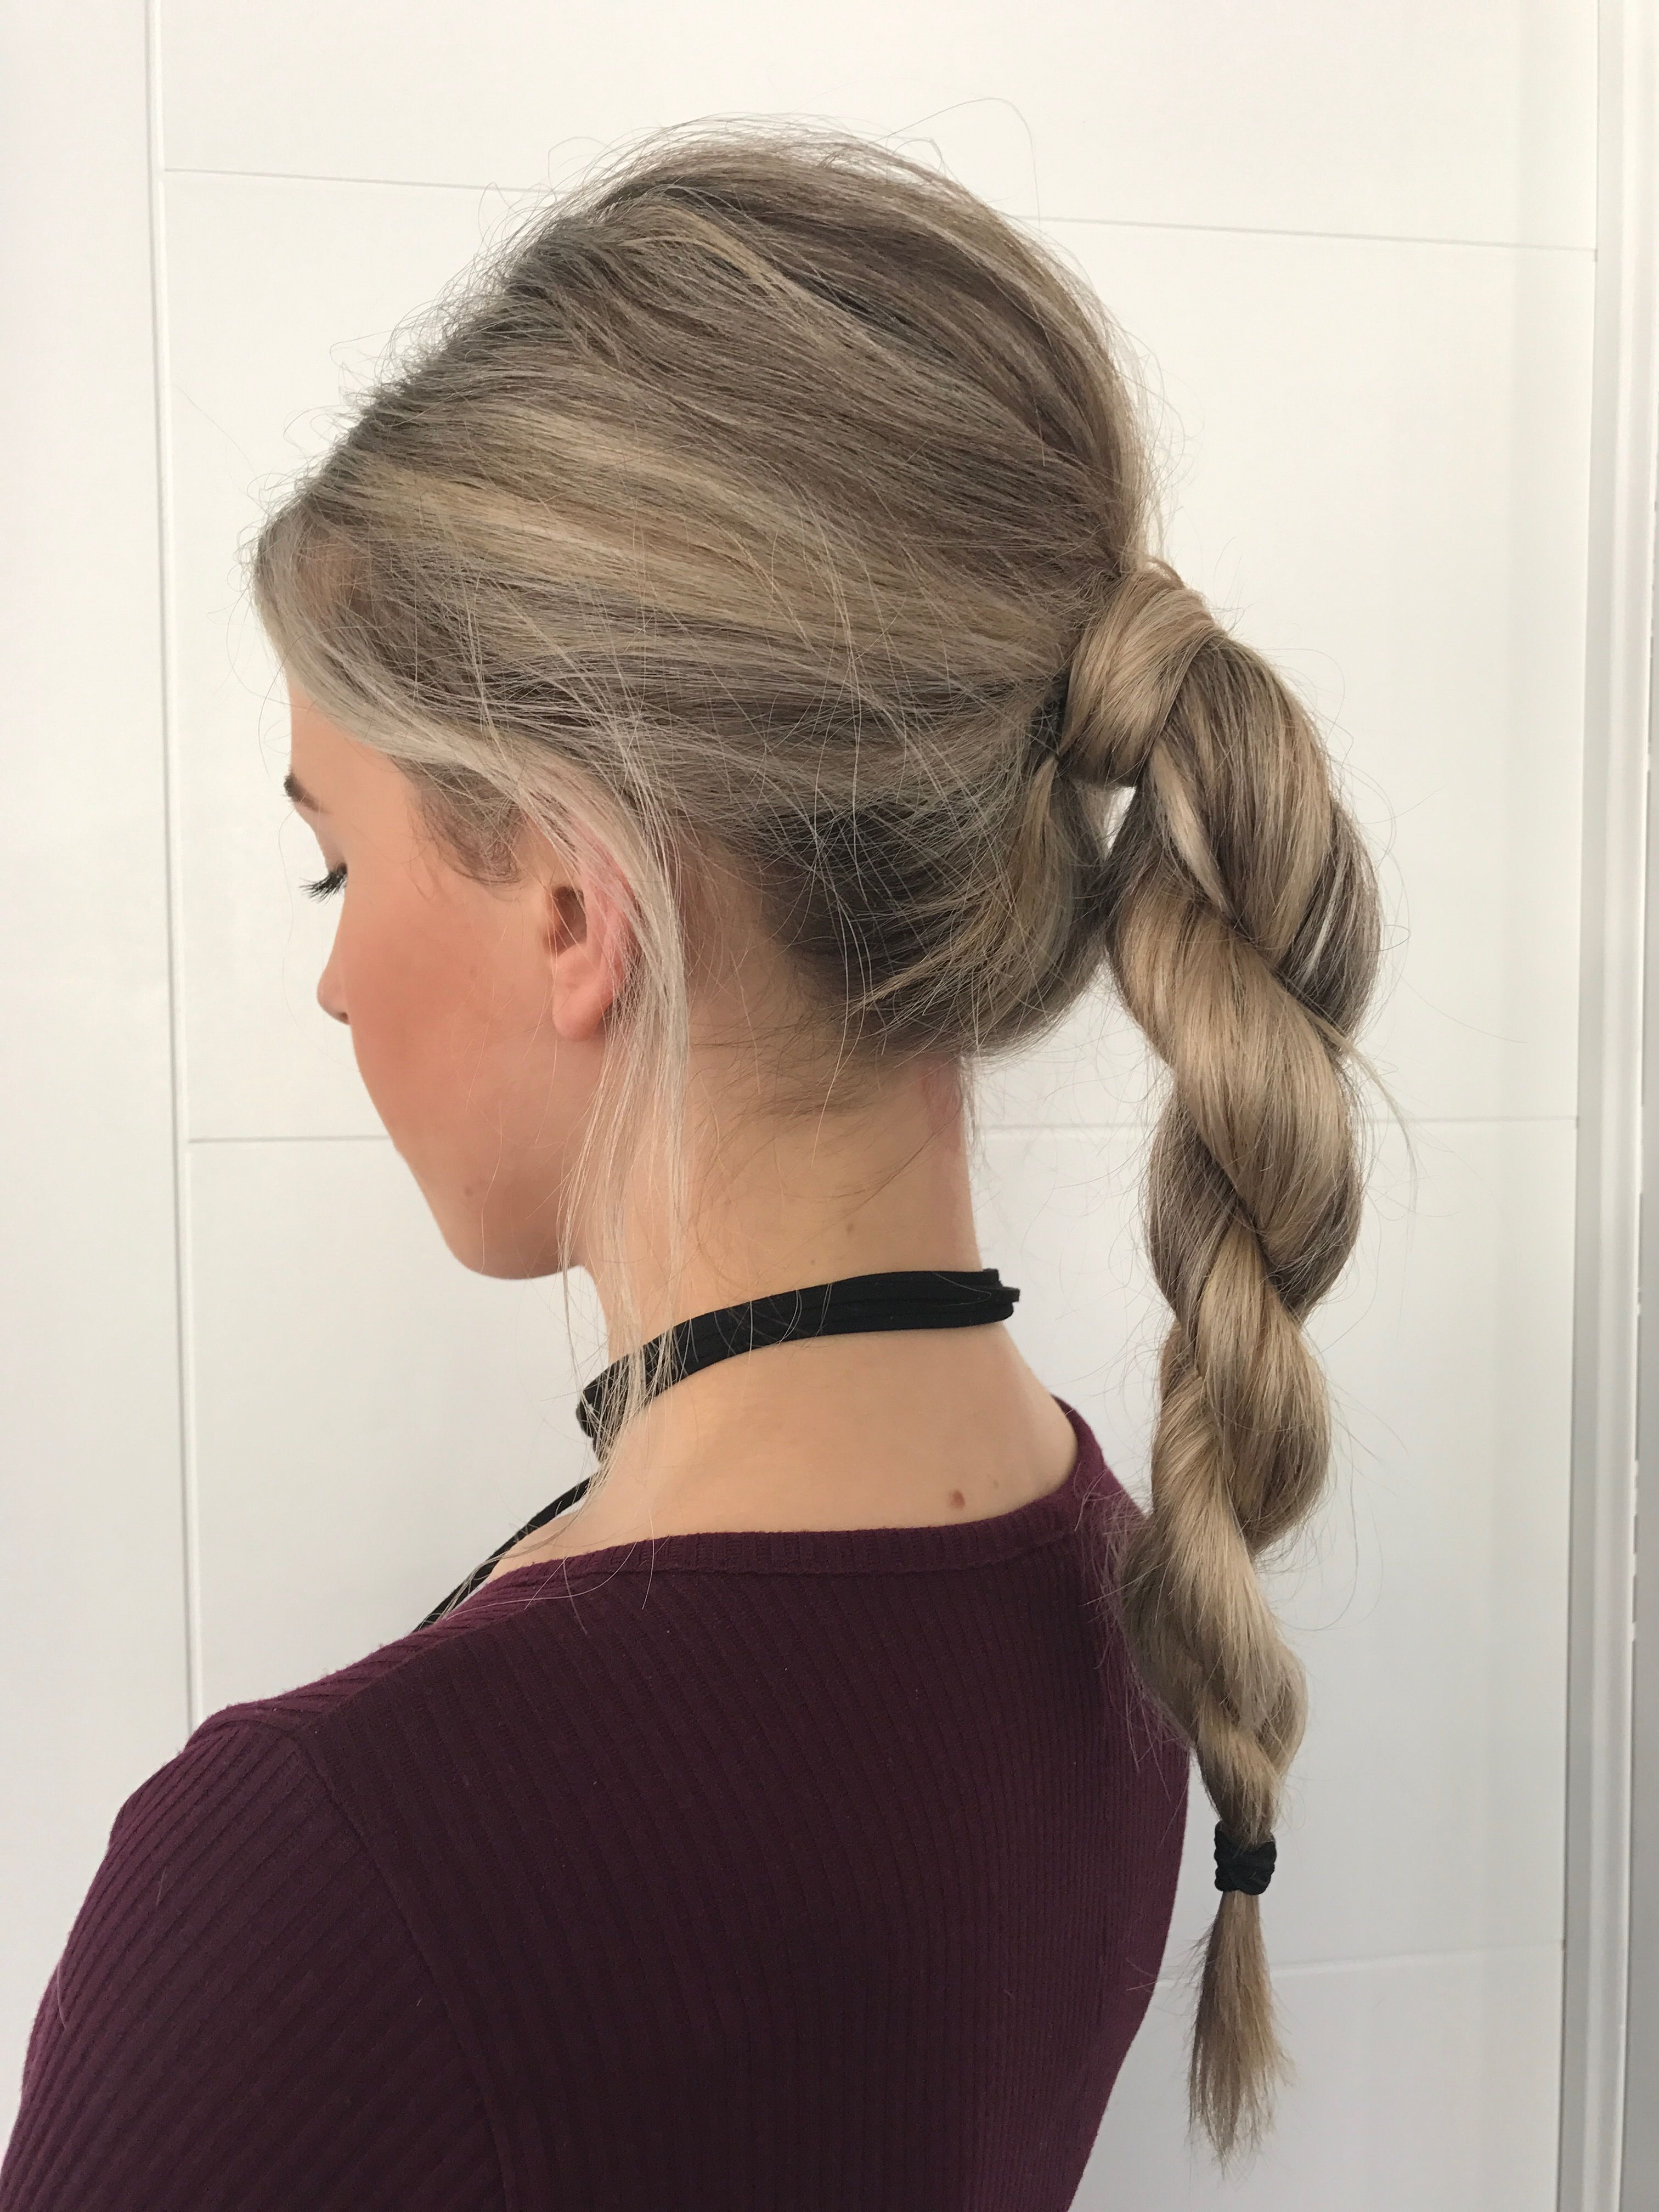 7 Cute & Easy Hairstyles For The Gym – Pureology Throughout Recent Intricate Rope Braid Ponytail Hairstyles (View 12 of 20)